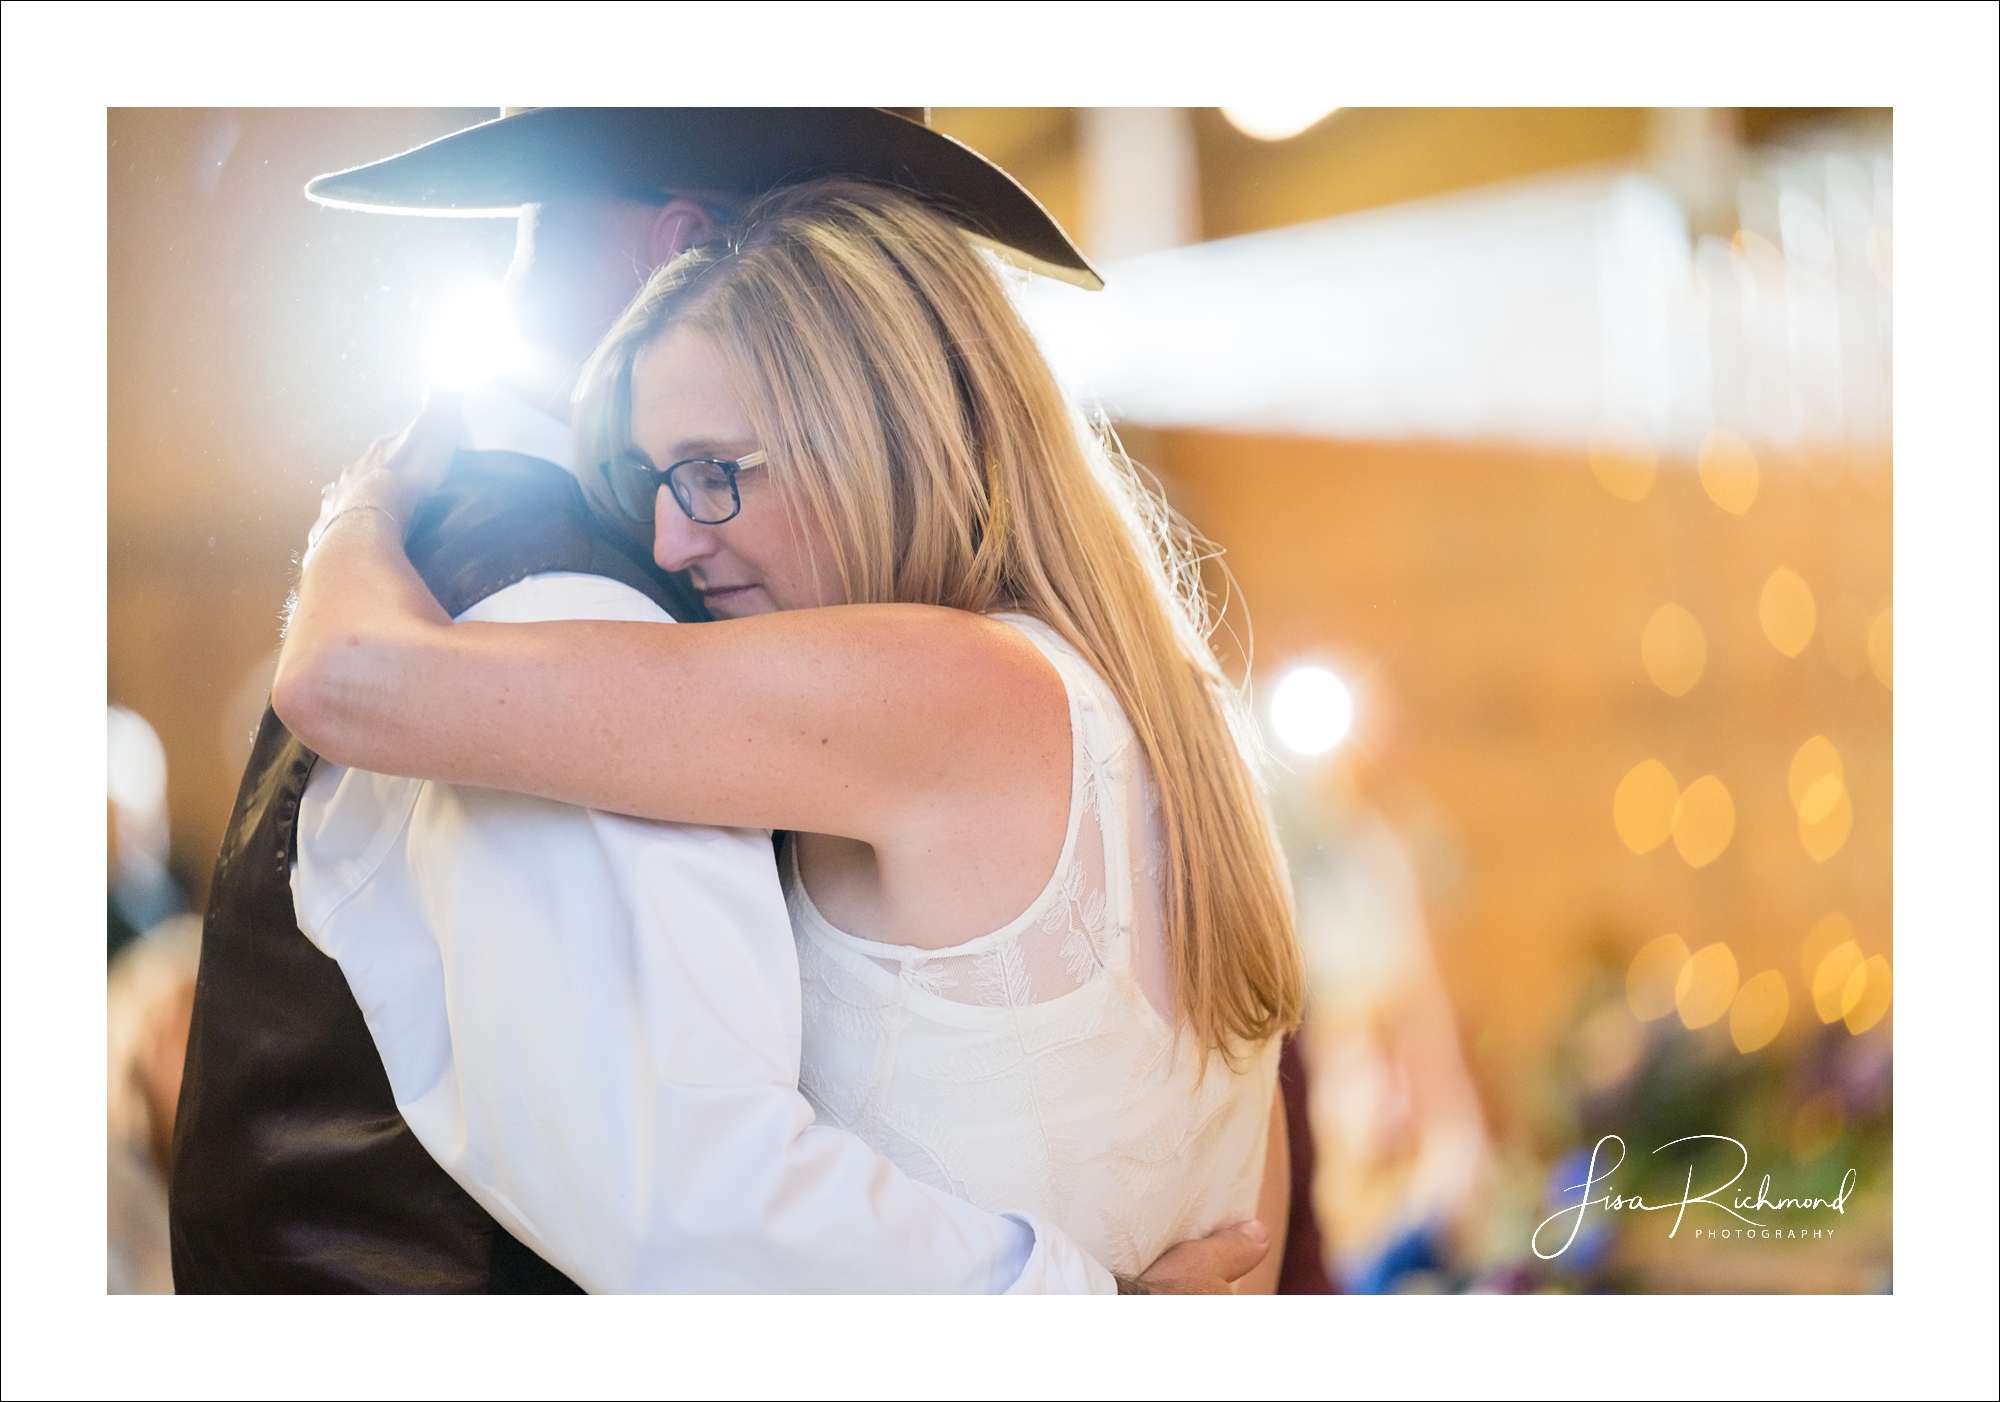 Pam and Dave- Married at the Bayley Barn